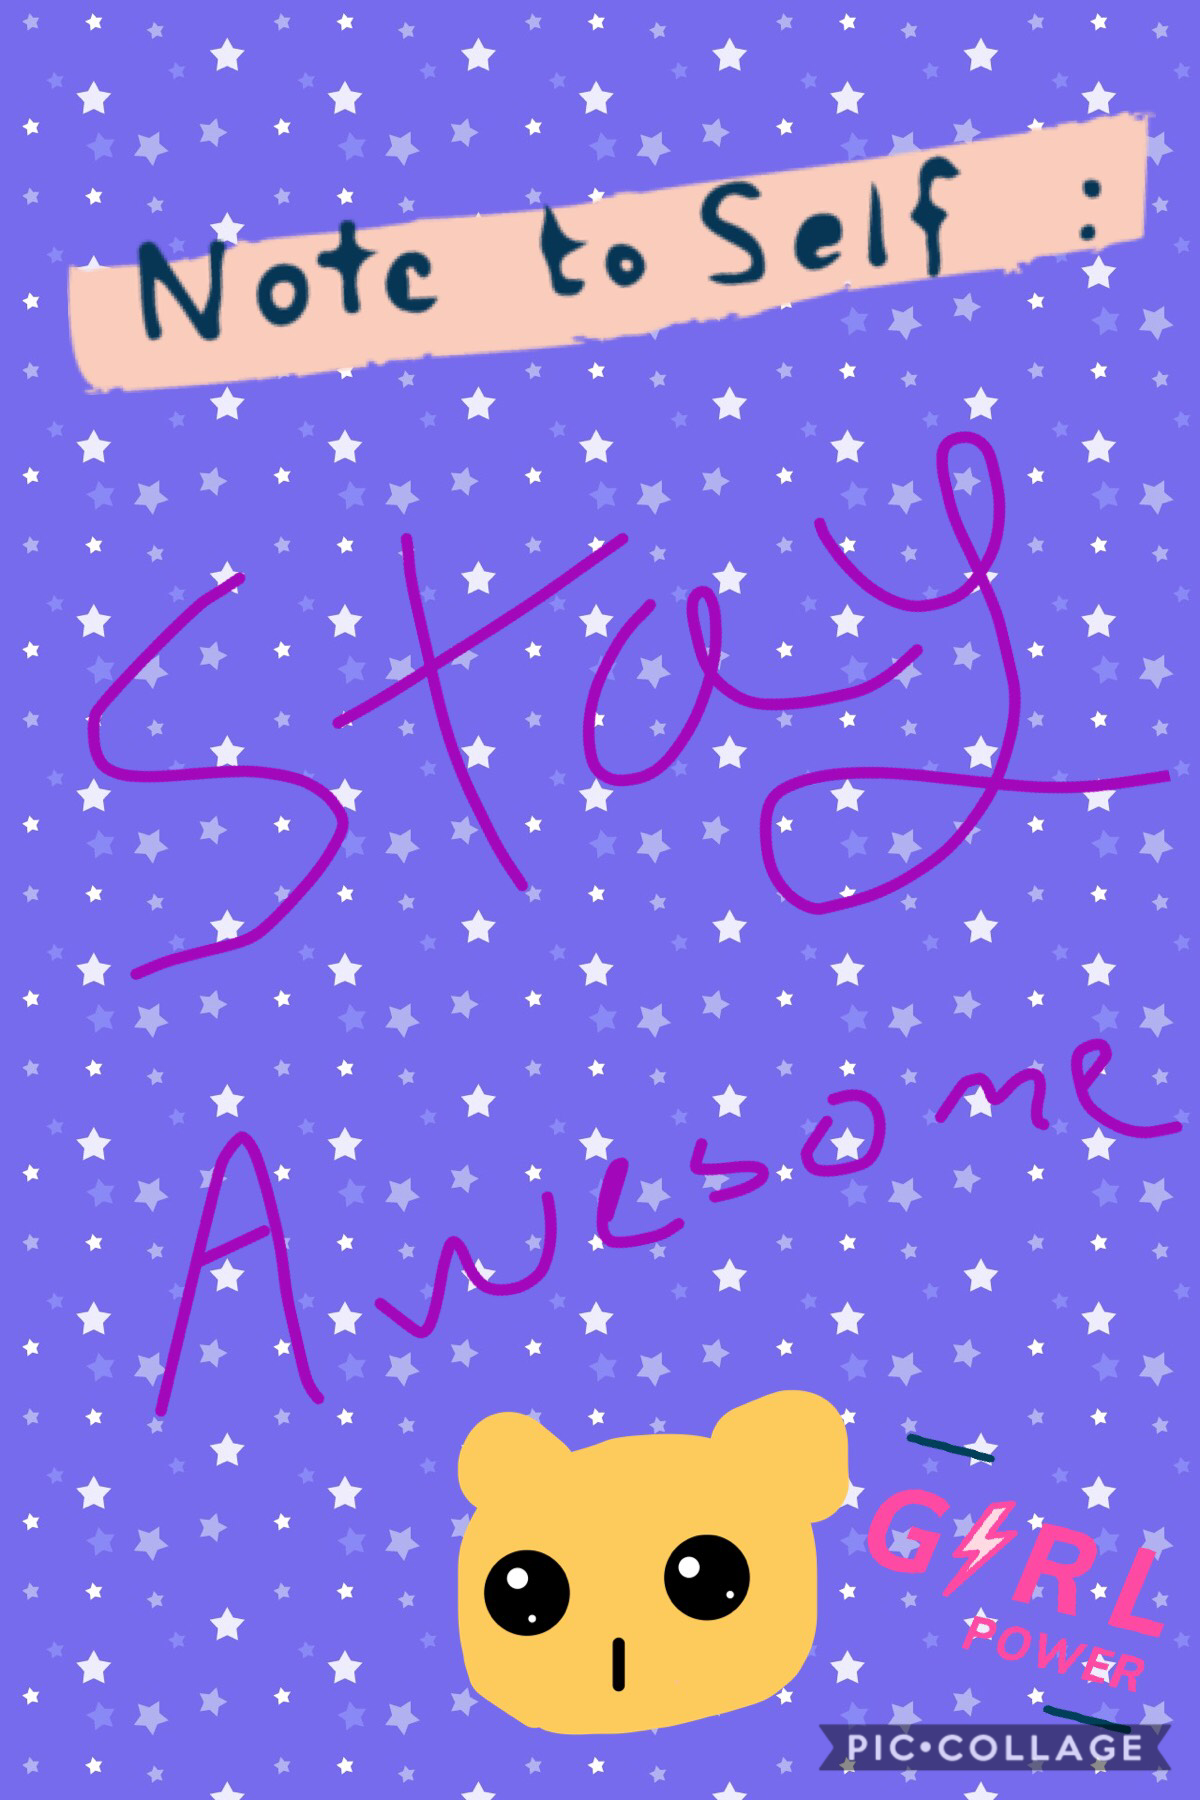 Stay awesome everyone!